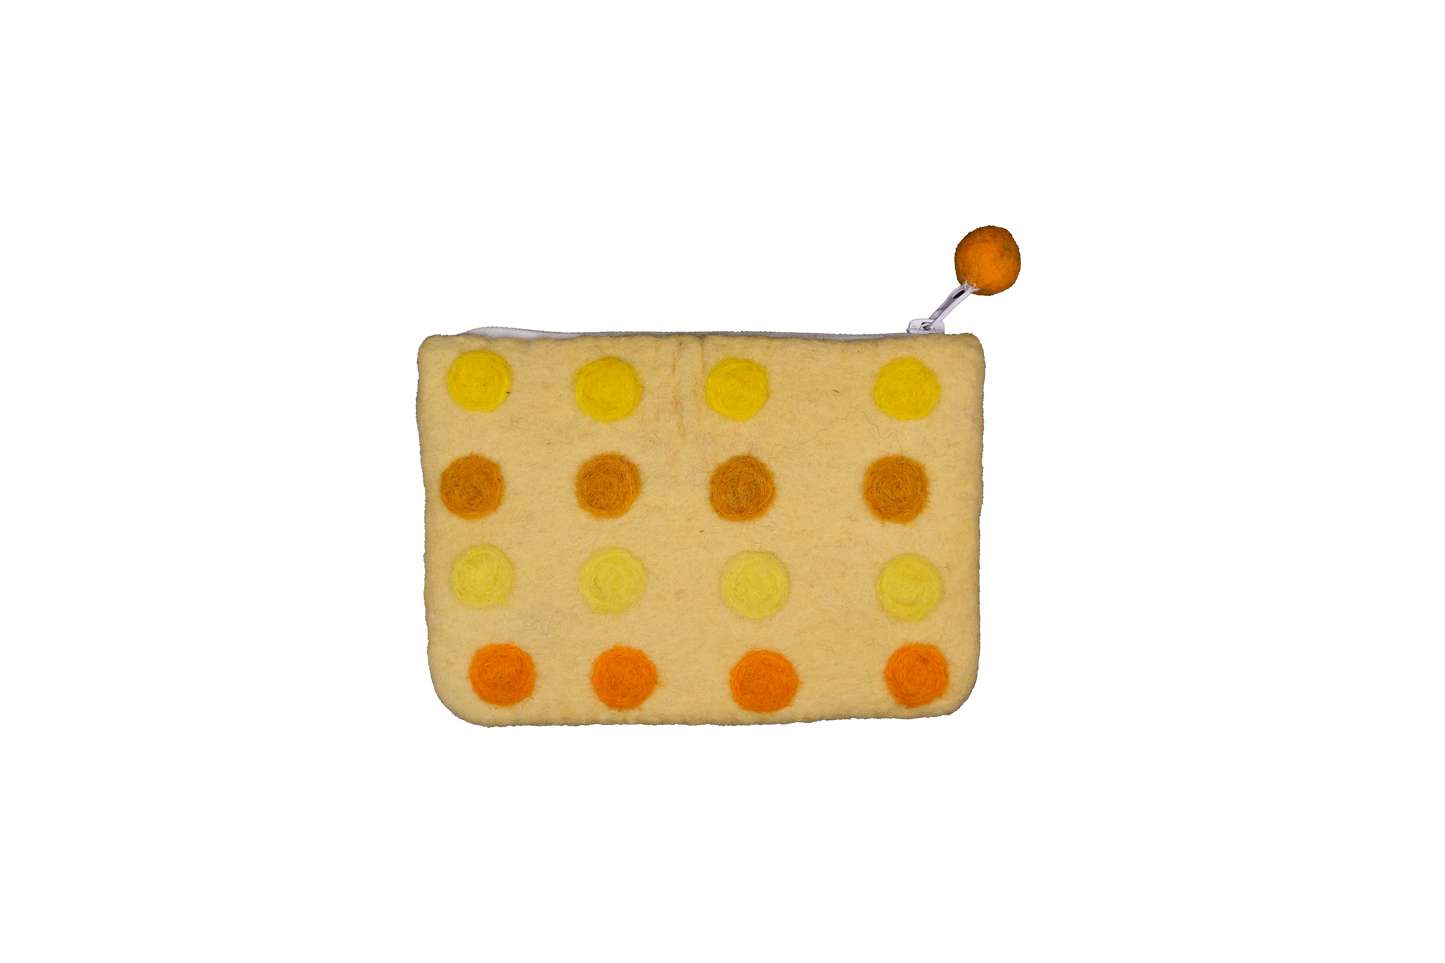 This Global Groove Life, handmade, ethical, fair trade, eco-friendly, sustainable, yellow and orange colored, New Zealand wool zipper coin purse was created by artisans in Kathmandu Nepal and is adorned with a polka dot motif and a pom pom zipper pull.